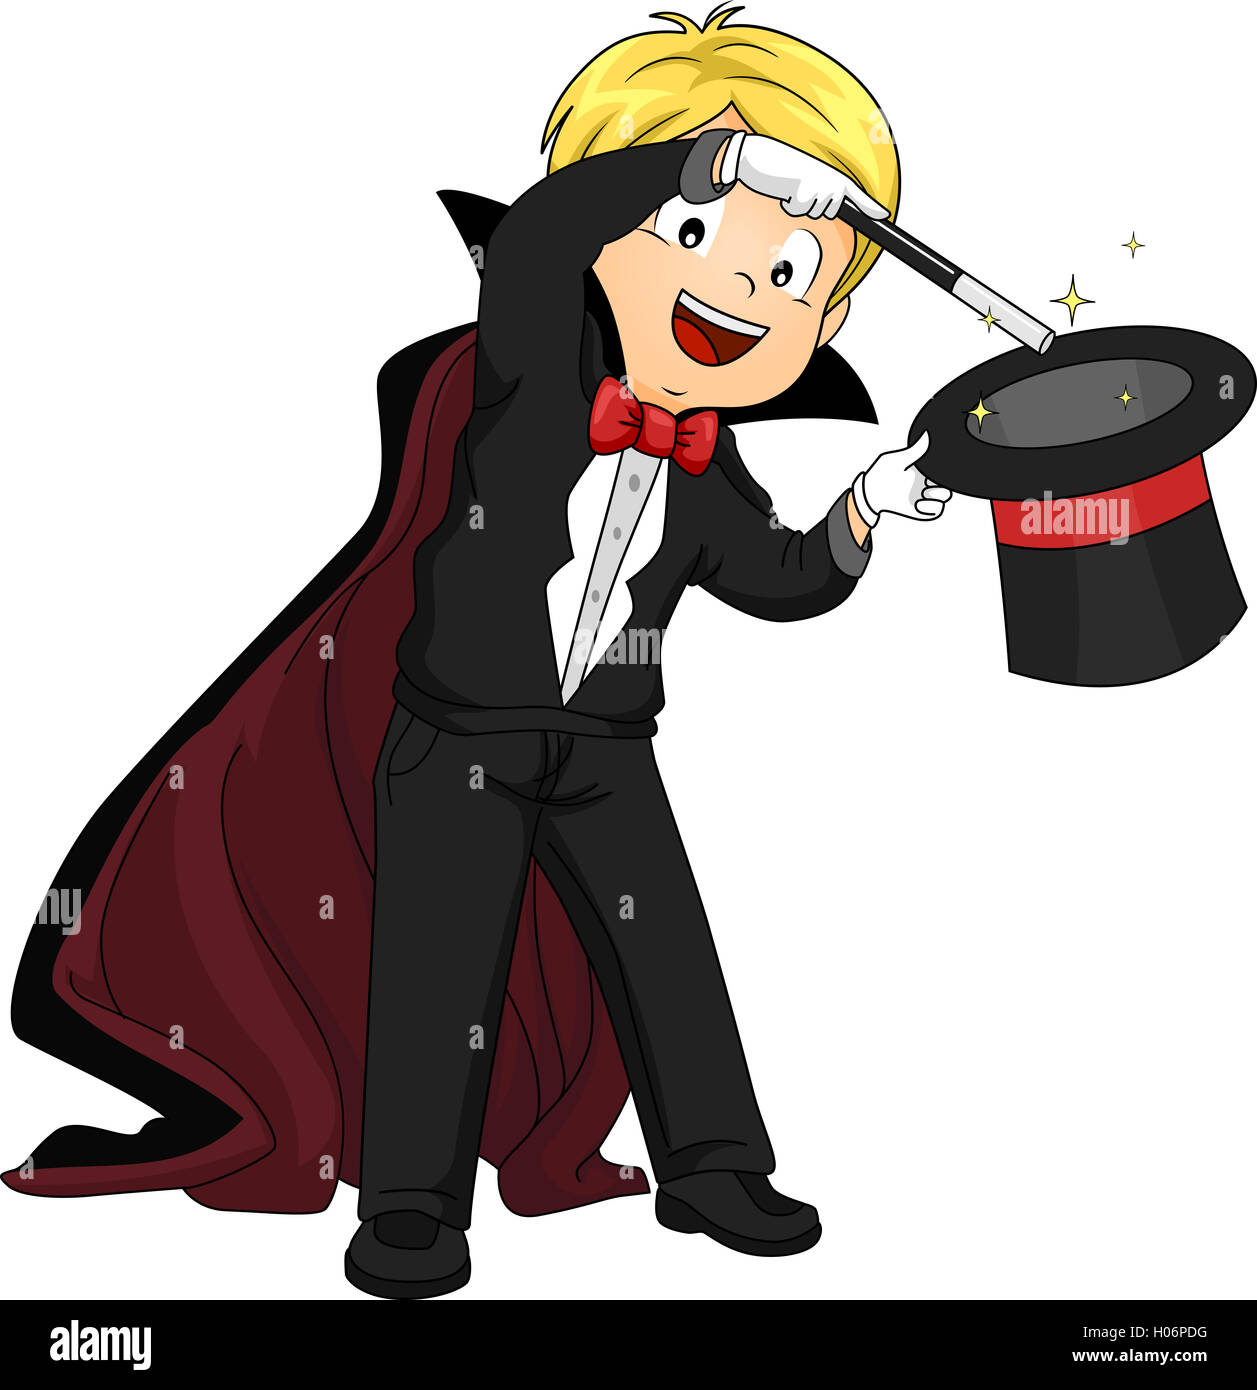 Illustration of a Boy Performing a Magic Trick Stock Photo